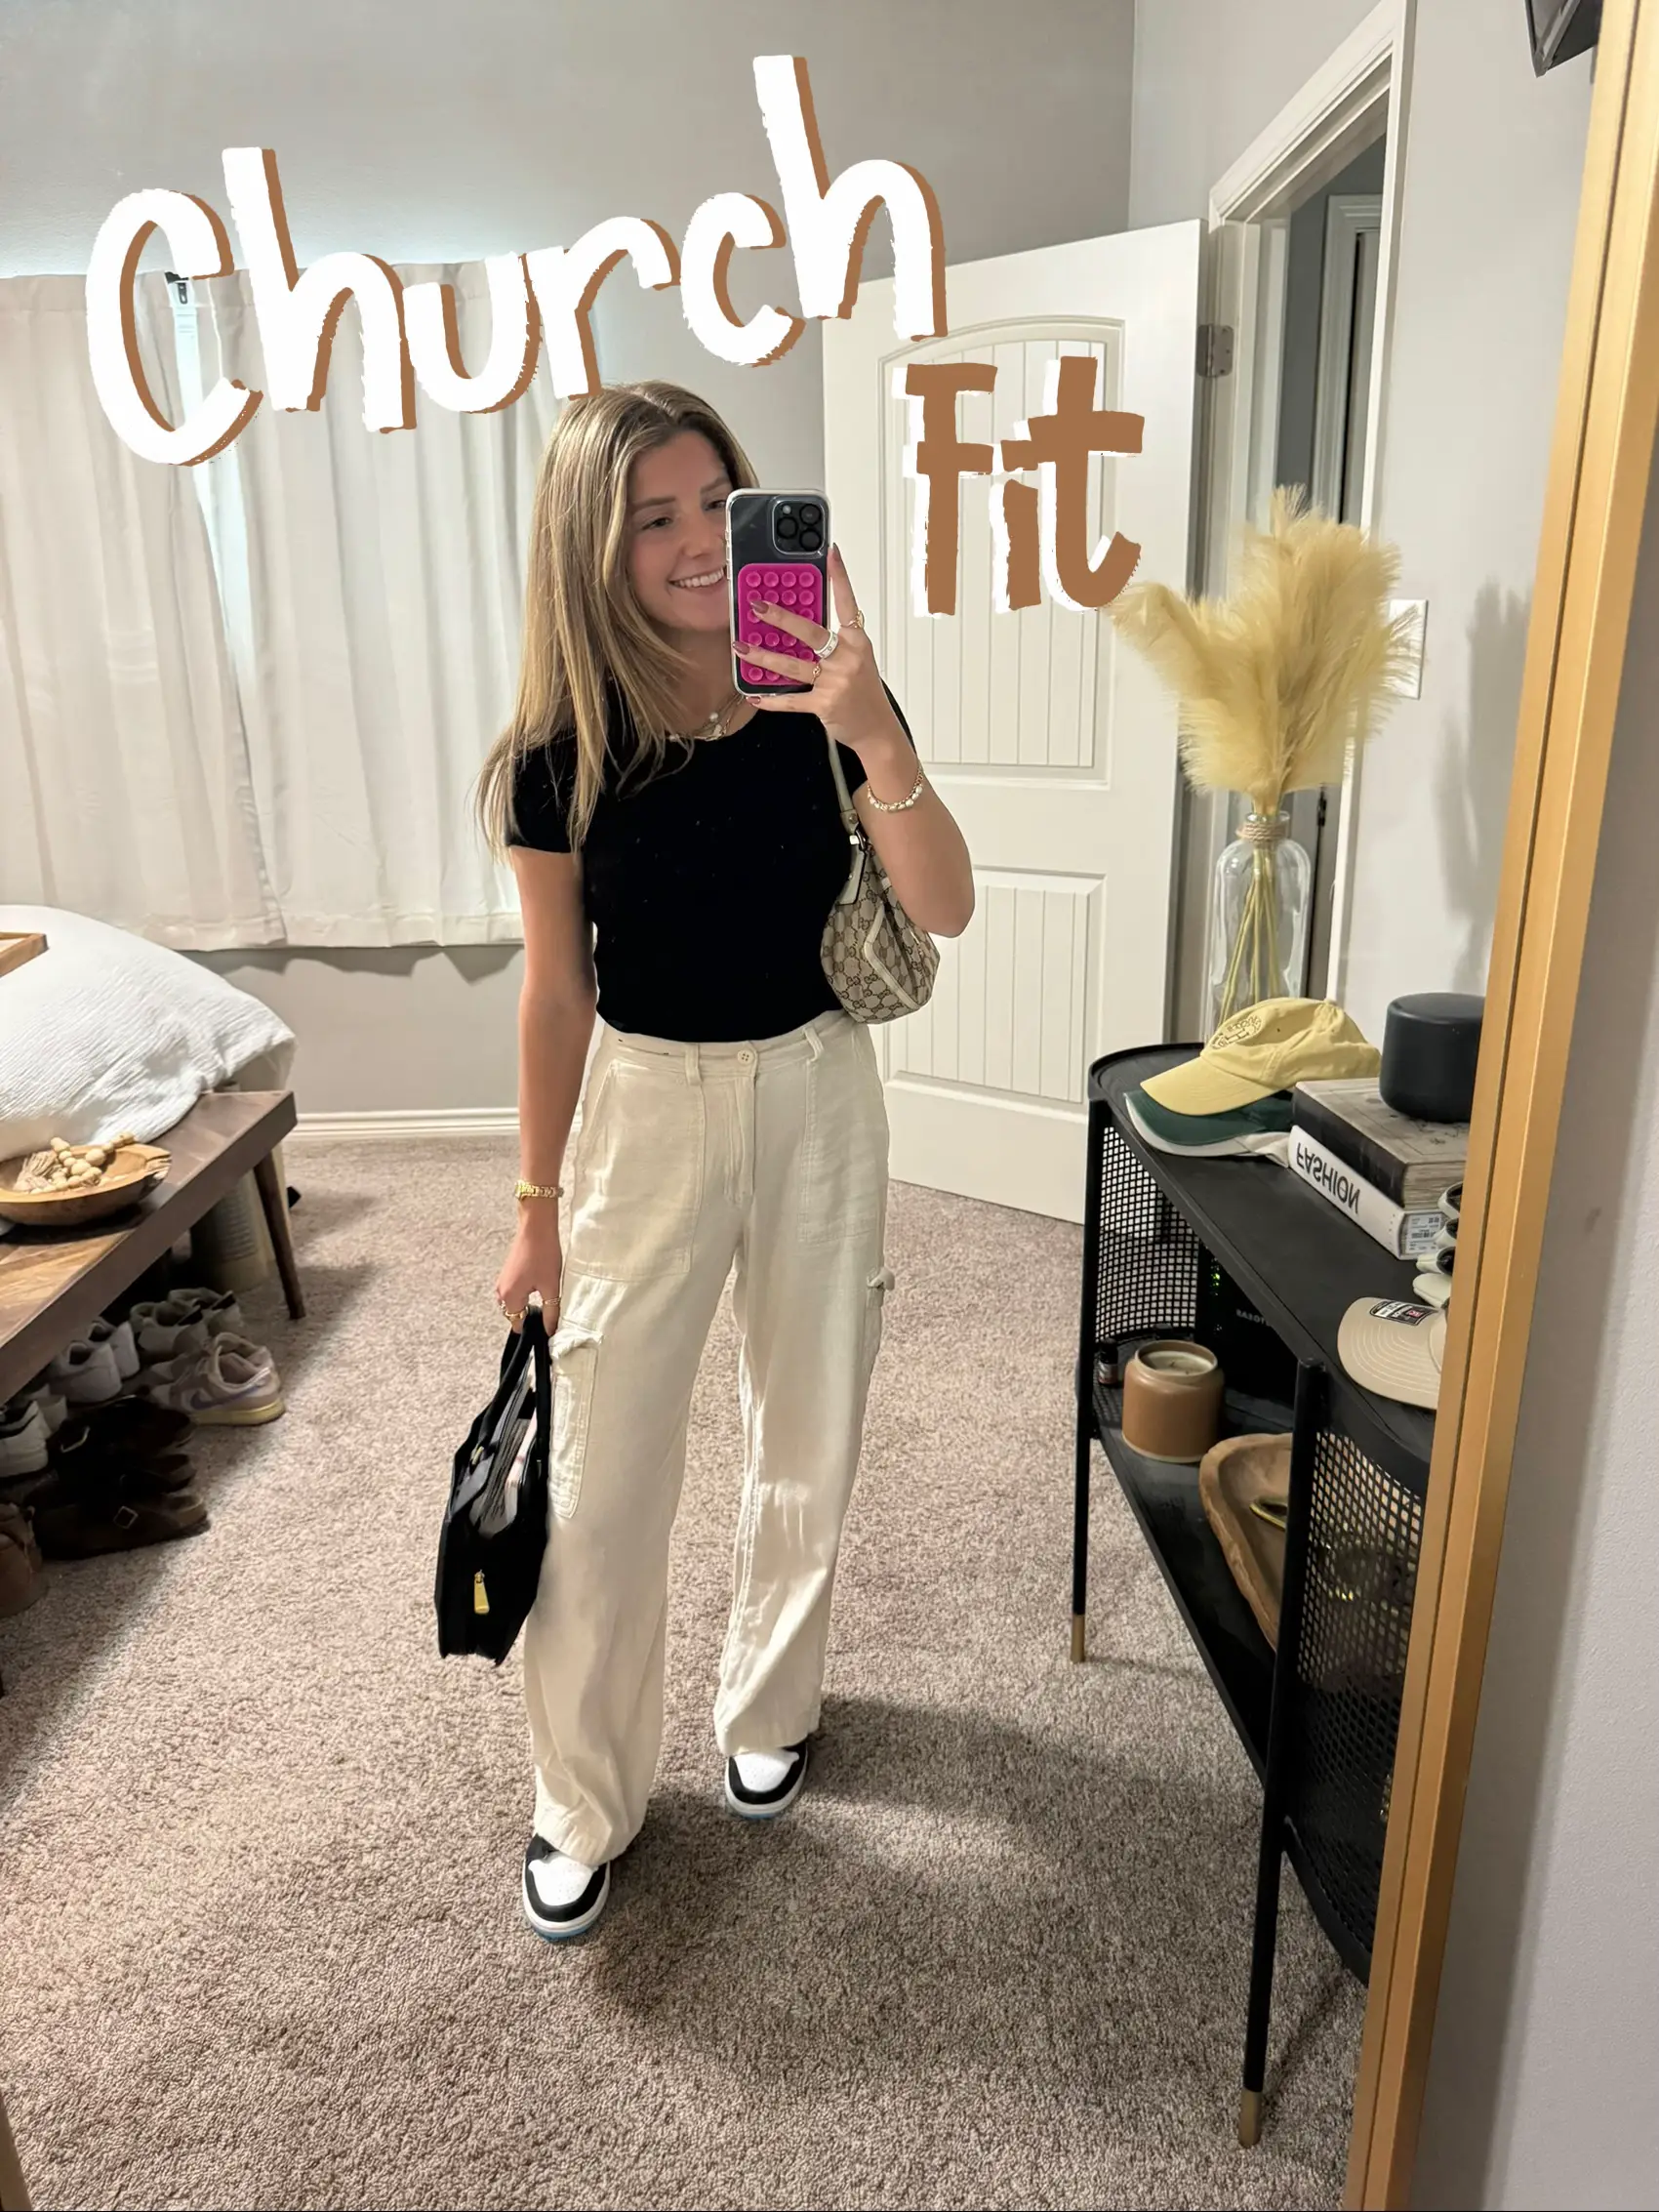 CASUAL CHURCH OUTFIT, linen pants outfit